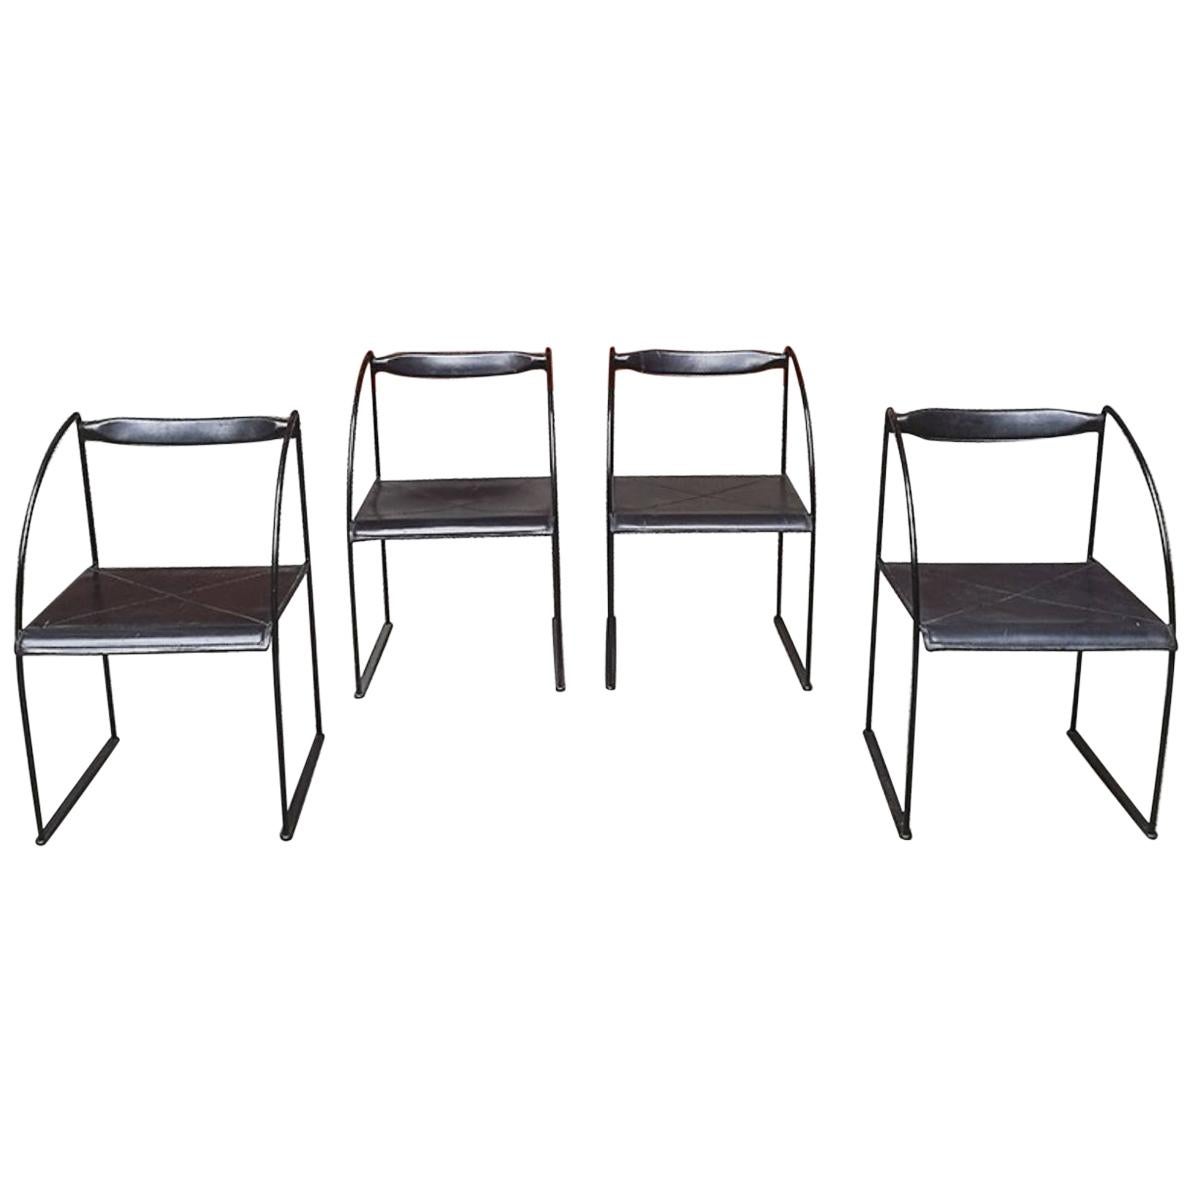 Set of 4 Chair "Patoz" by Francesco Soro for ICF in Steel Black and Leather